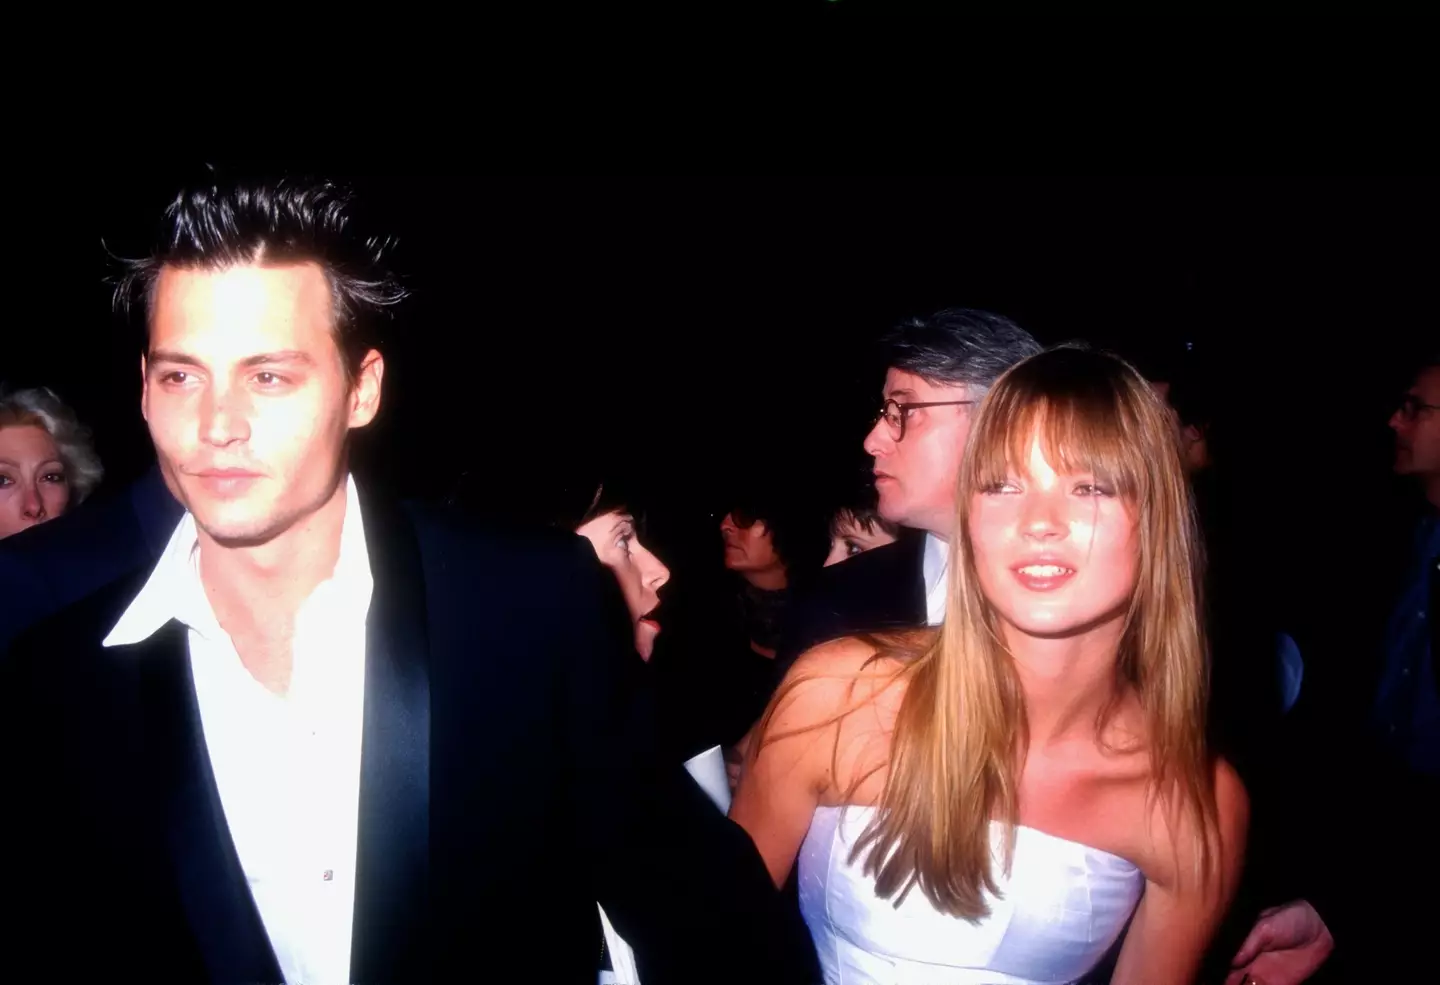 Johnny Depp said it was his fault his and Kate Moss' relationship ended.